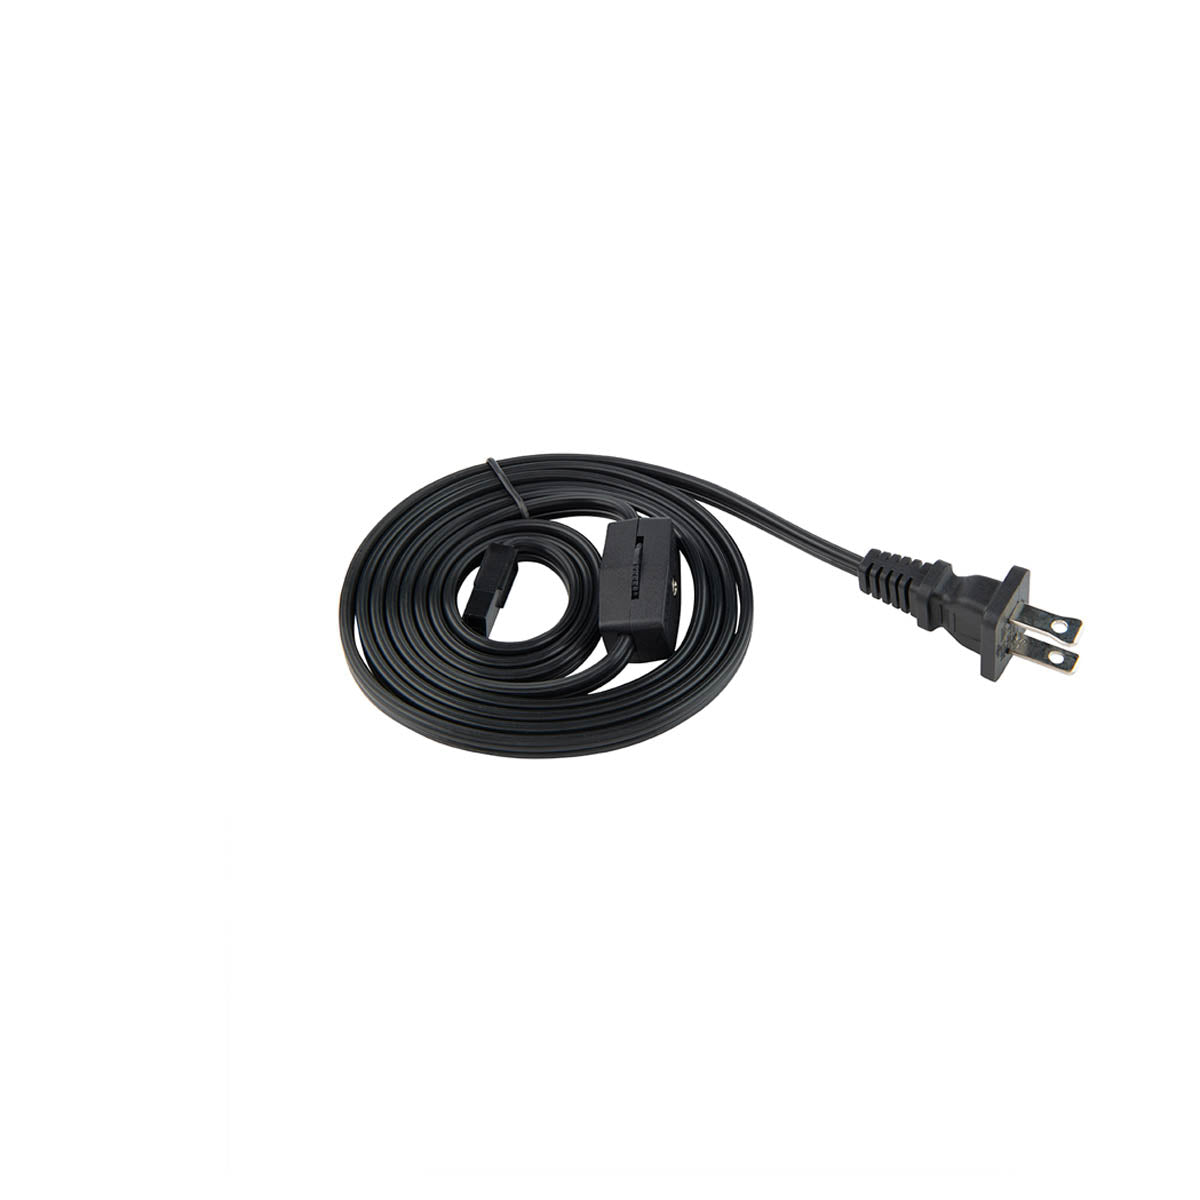 Black Power Cord for 3-CCT Puck Light with on/off switch